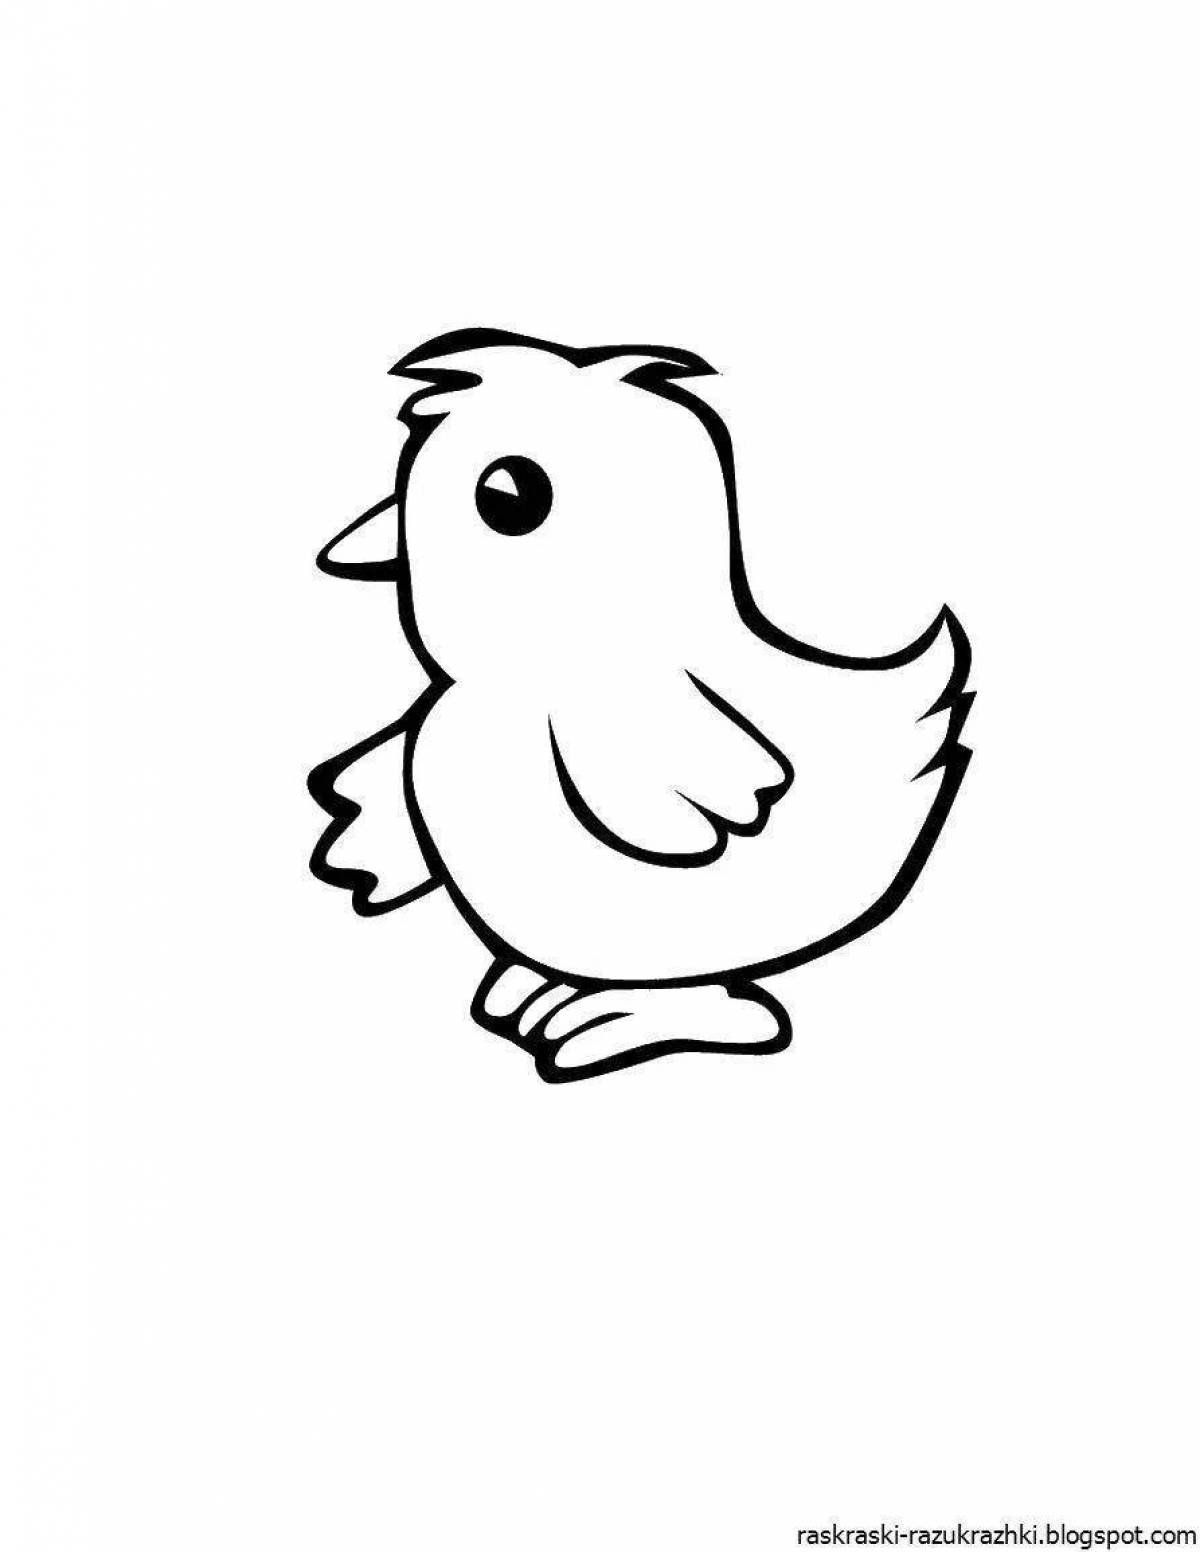 Cute chicken drawing for kids